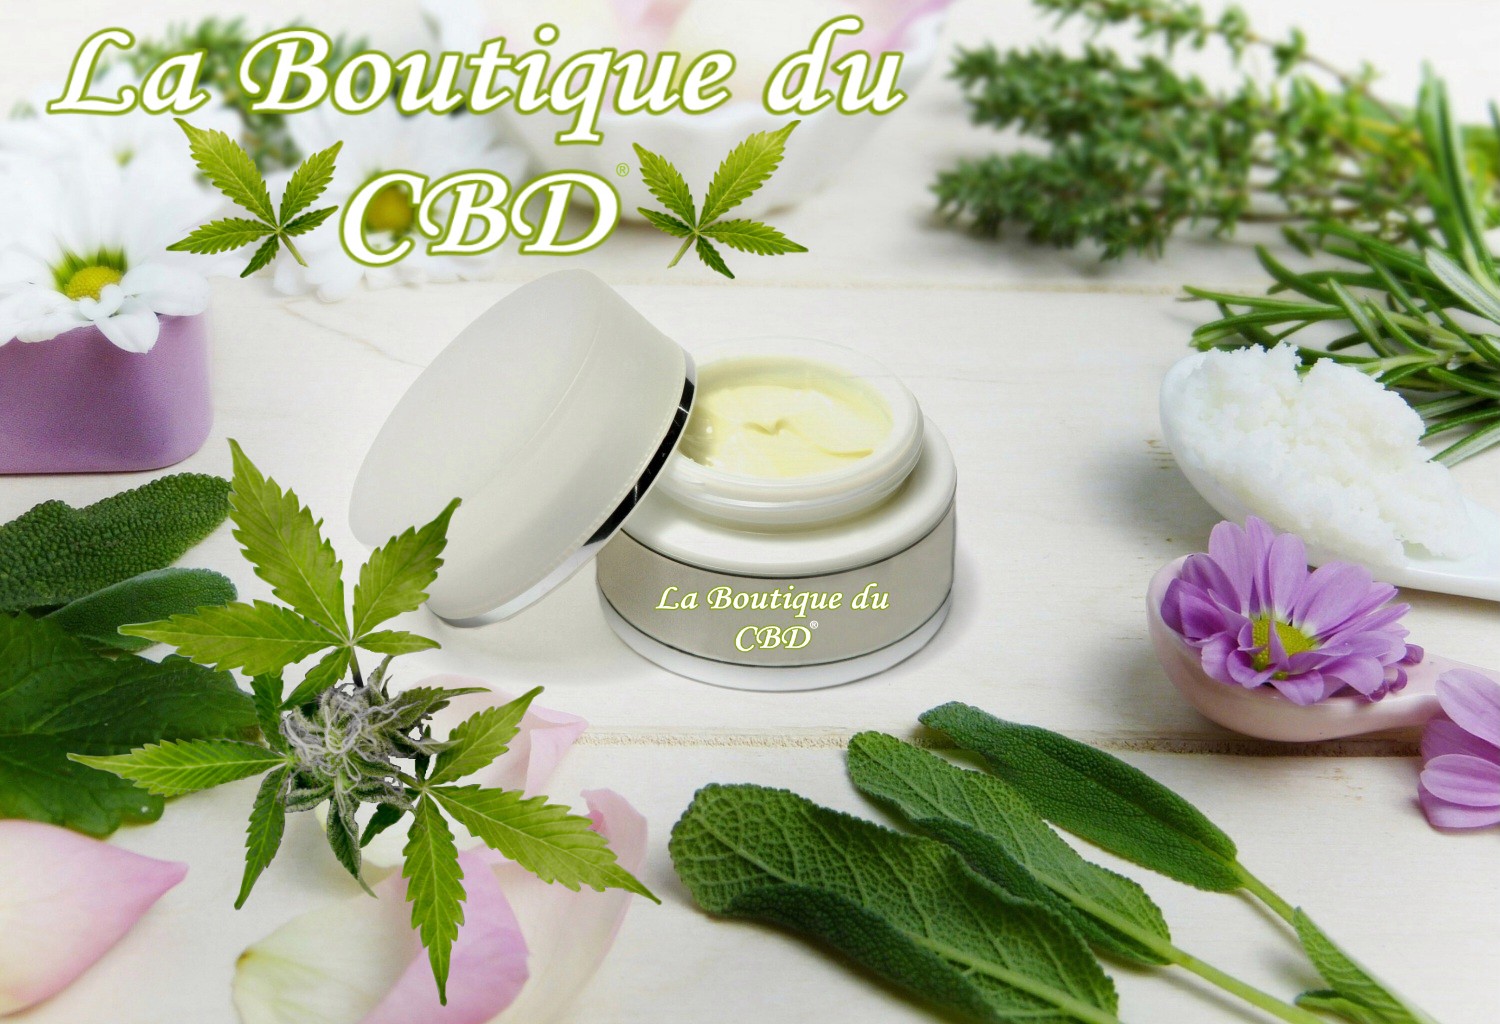 COSMETIQUES CBD PRUNAY-LE-TEMPLE 78